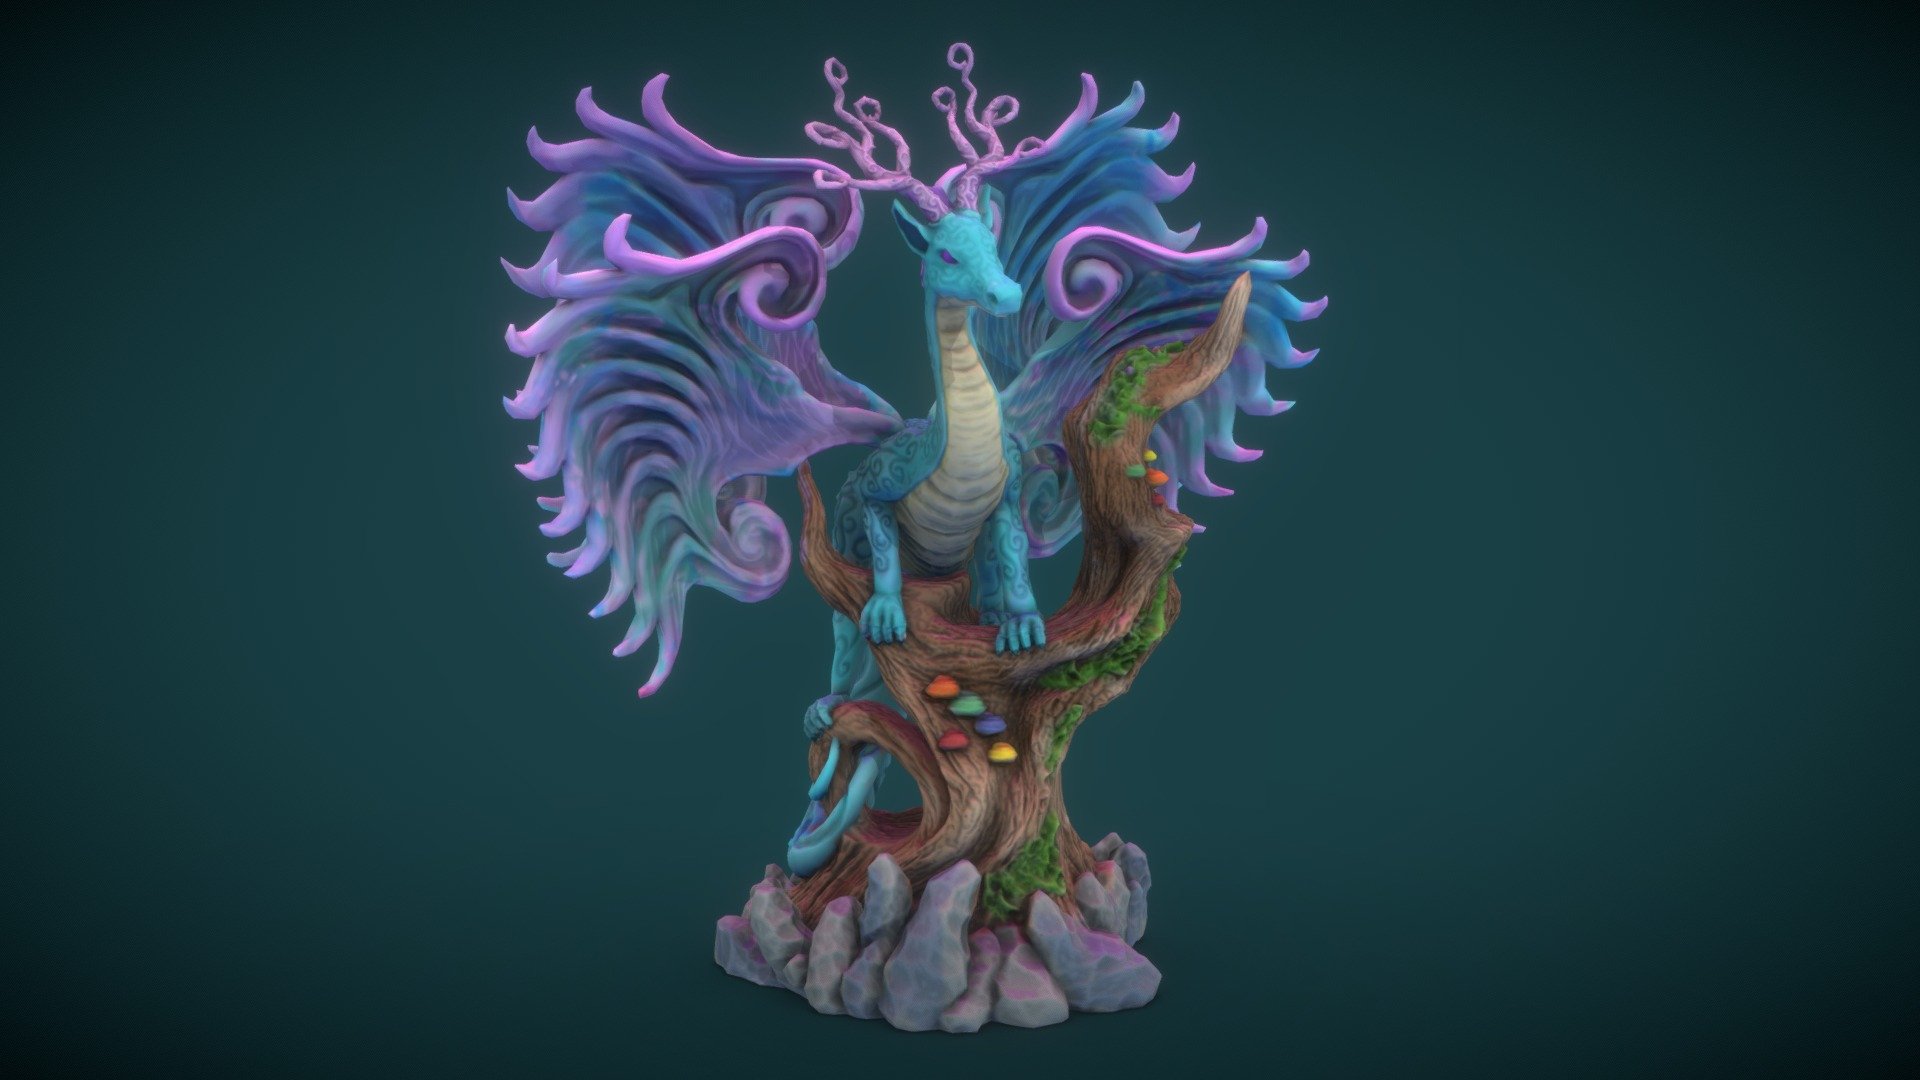 Model I originally made for 3D printing: https://www.myminifactory.com/object/3d-print-eirvu-dragon-of-the-fae-125811

Decimated it (a lot) and painted in Substance 3d model